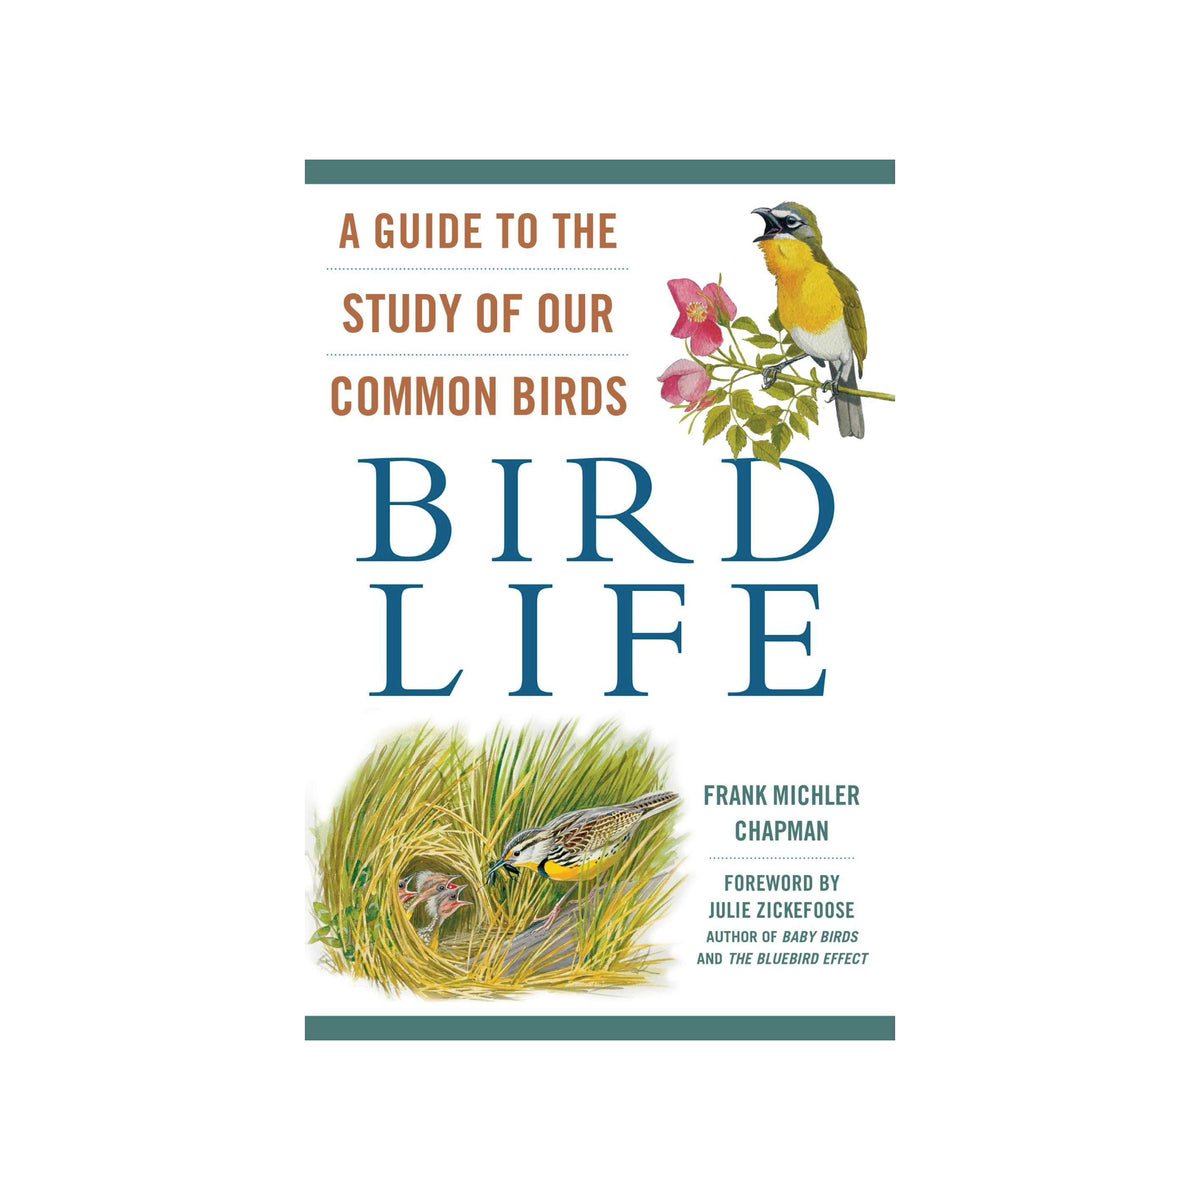 A Guide To The Study Of Our Birds: Bird Life